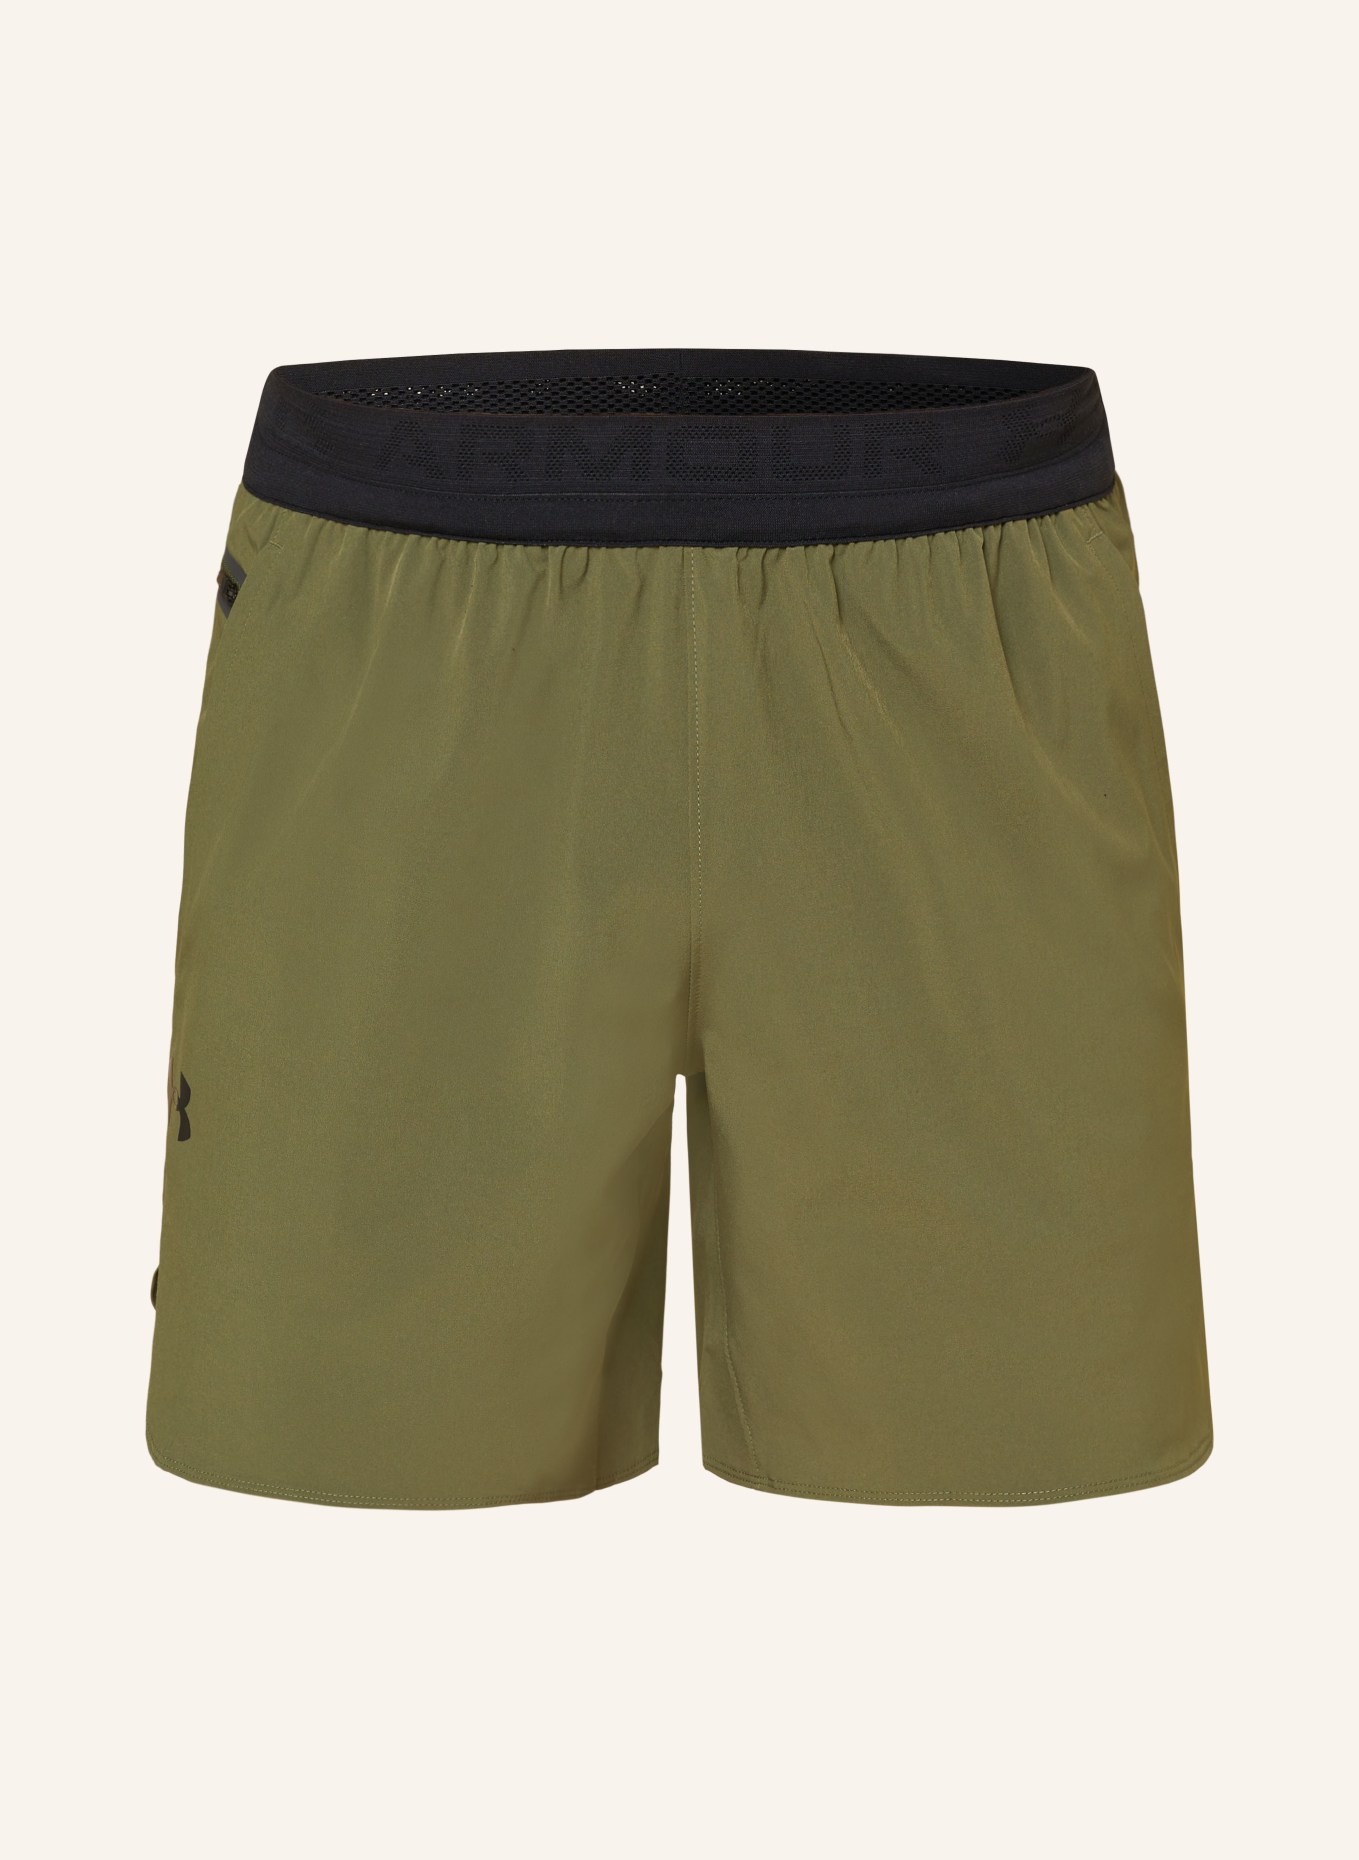 Under Armour Adjustable Waist Athletic Shorts for Men